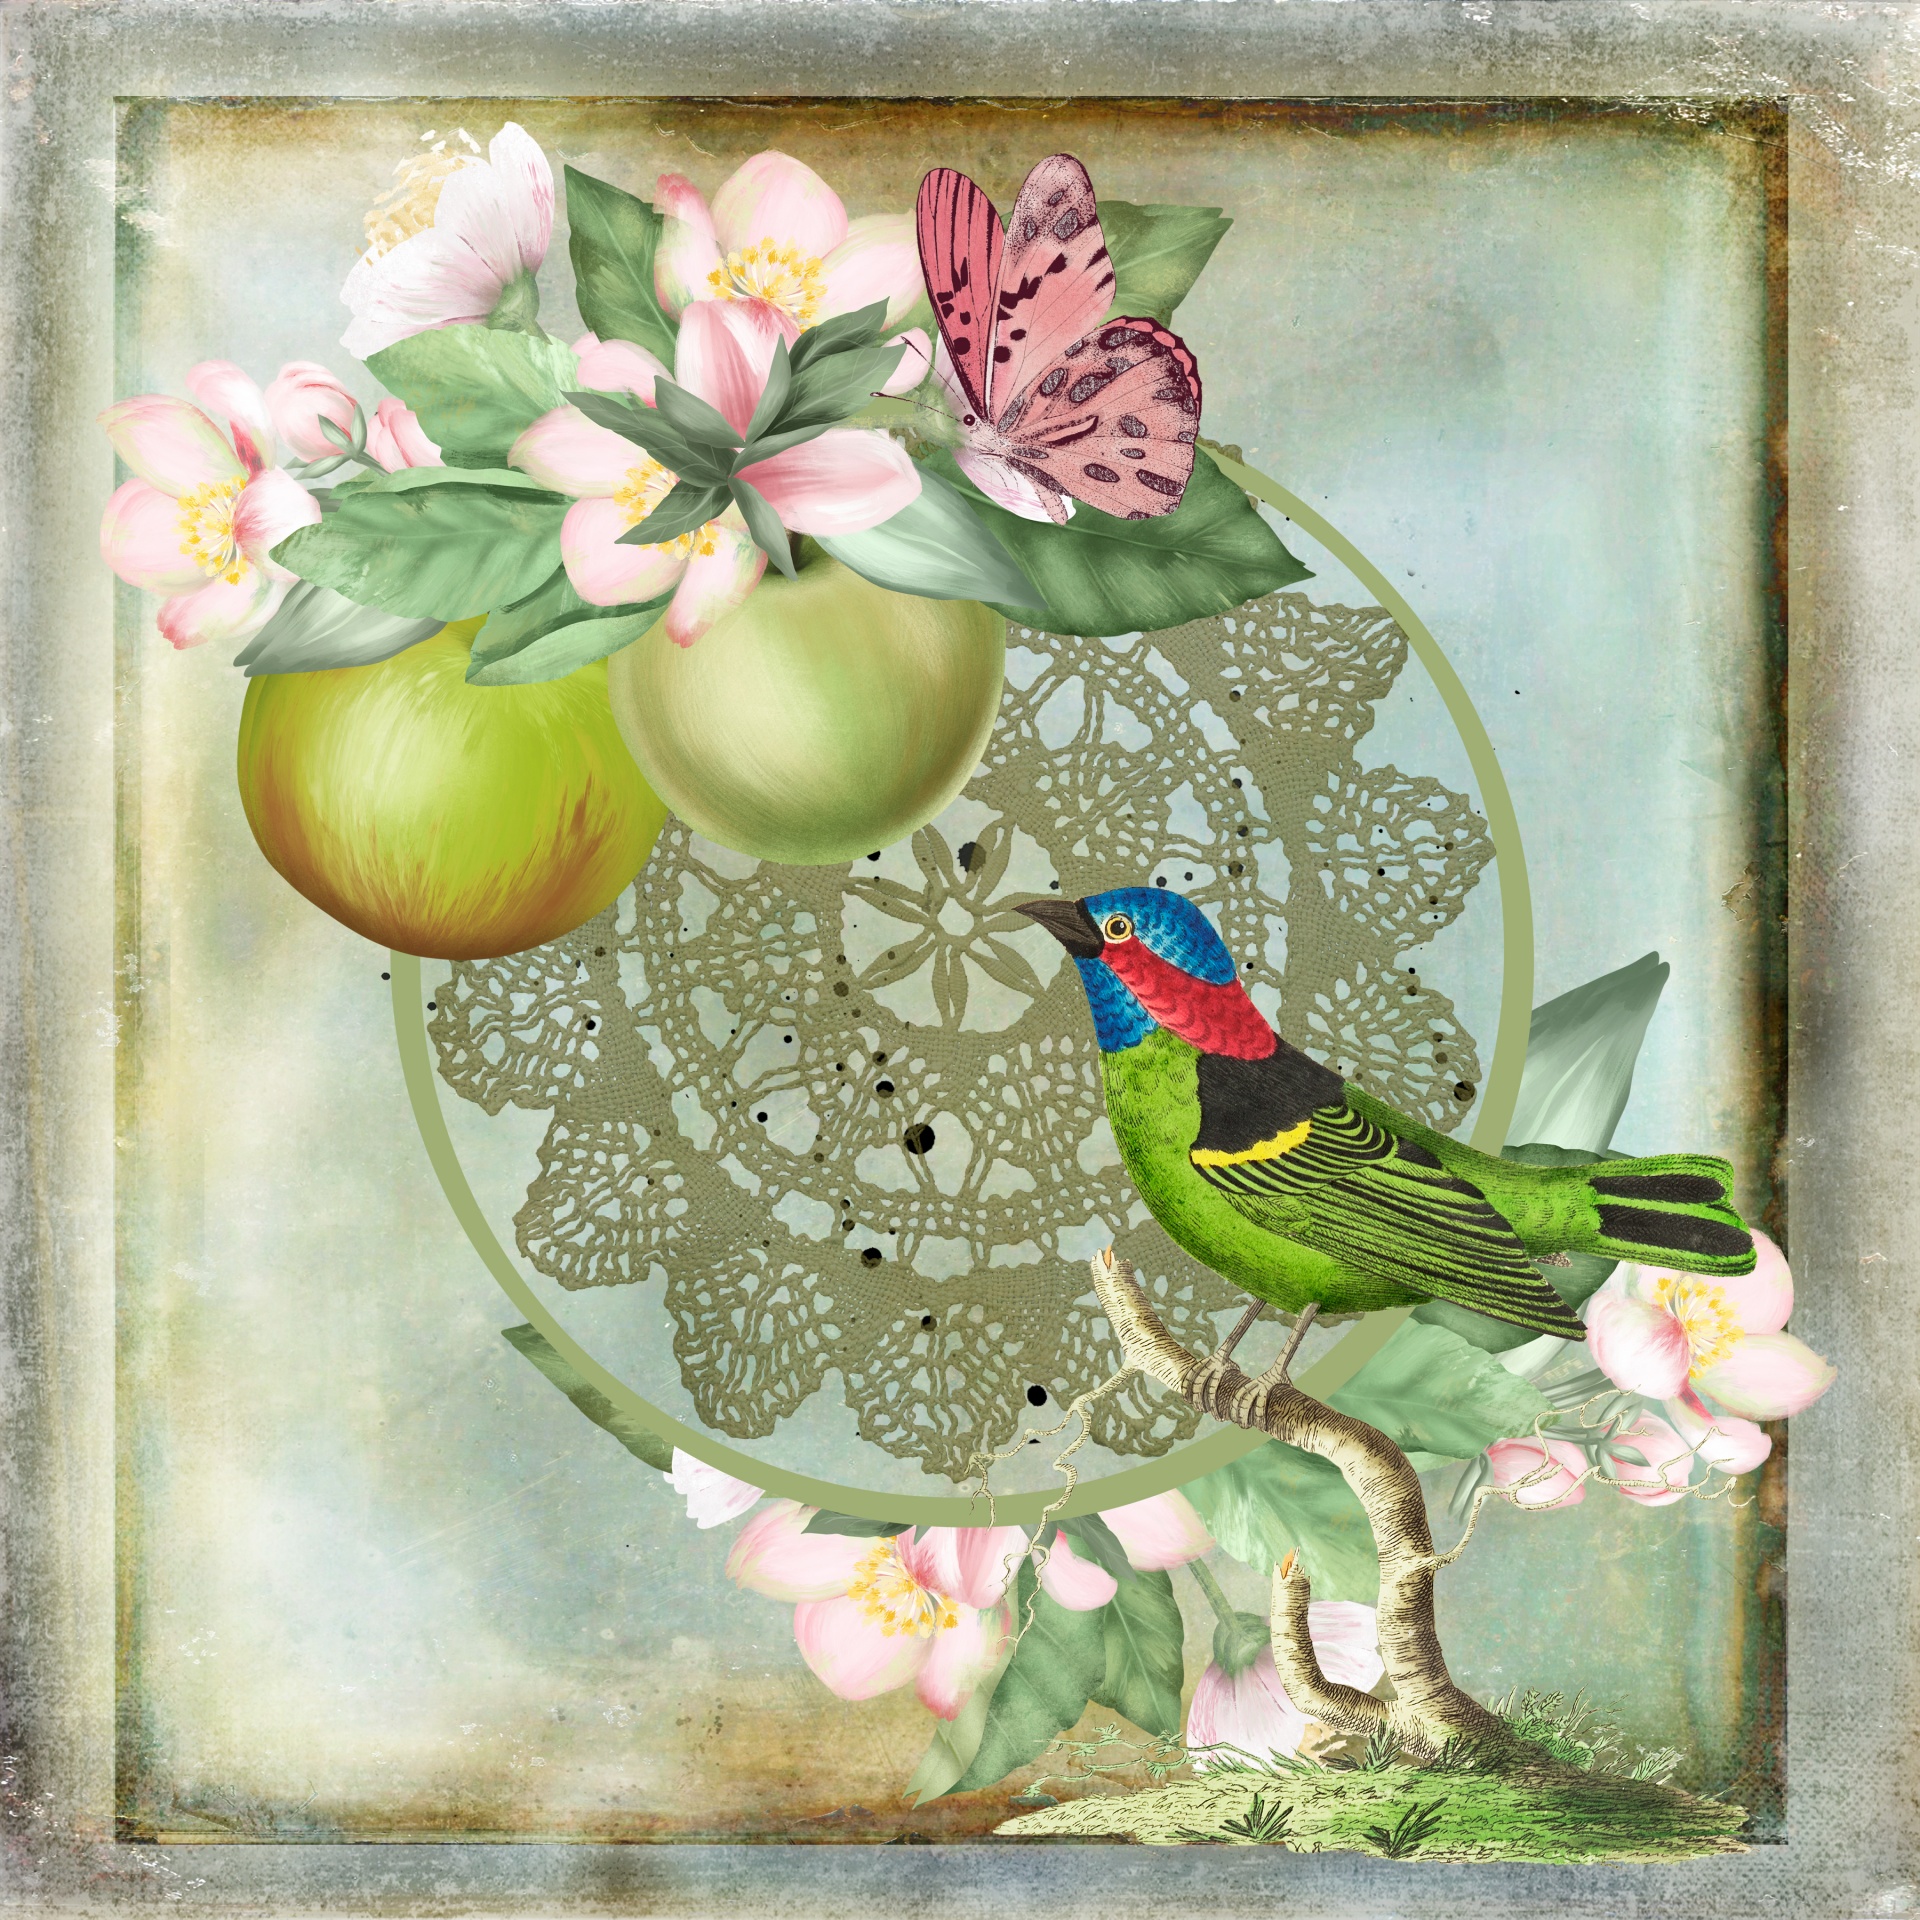 green apples, pink blossoms, butterfly and a bird on vintage textured green background